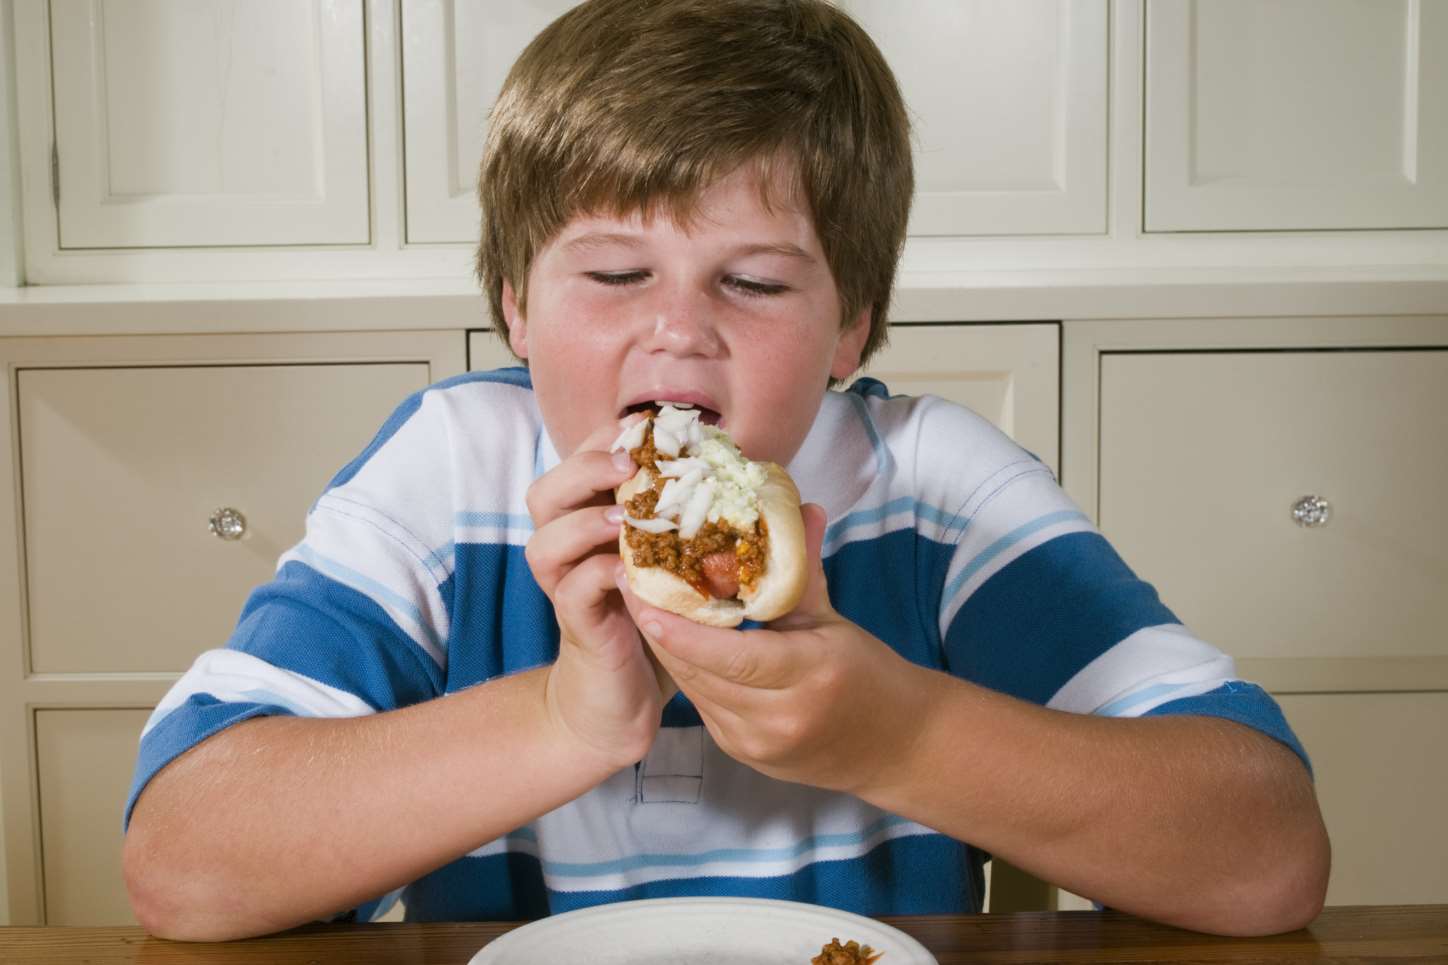 Stock image of obese child